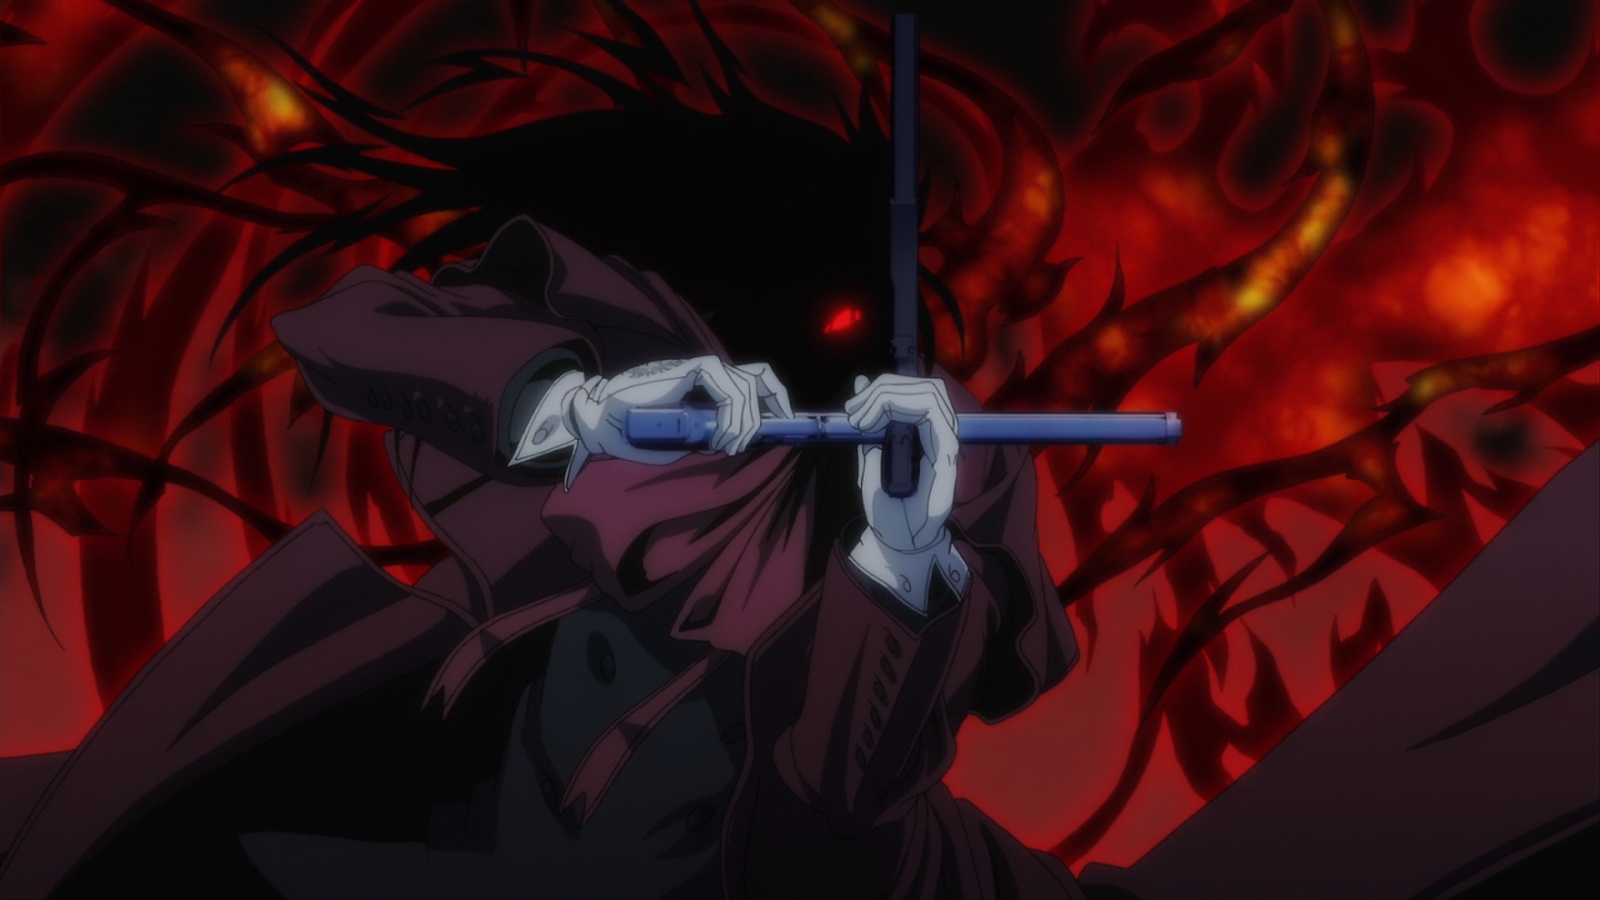 10 Top Hellsing Ultimate Wallpaper Hd FULL HD 1920×1080 For PC Background